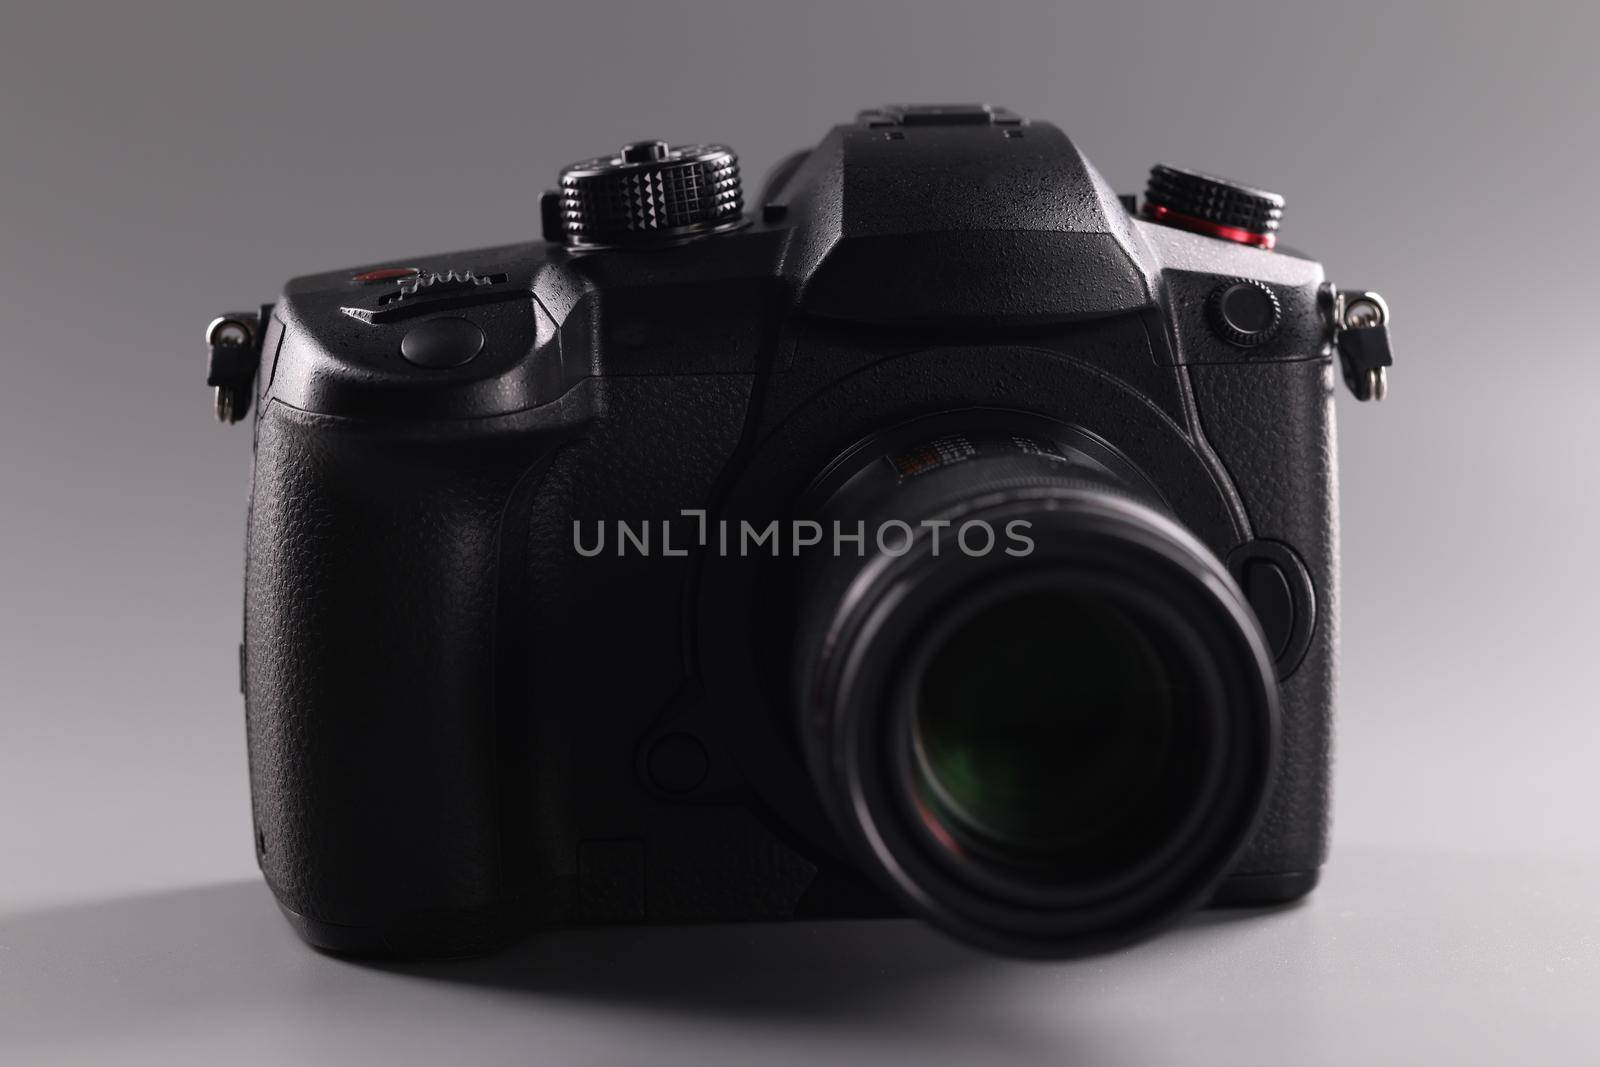 Closeup of black professional camera on gray background. Sale of photographic equipment concept